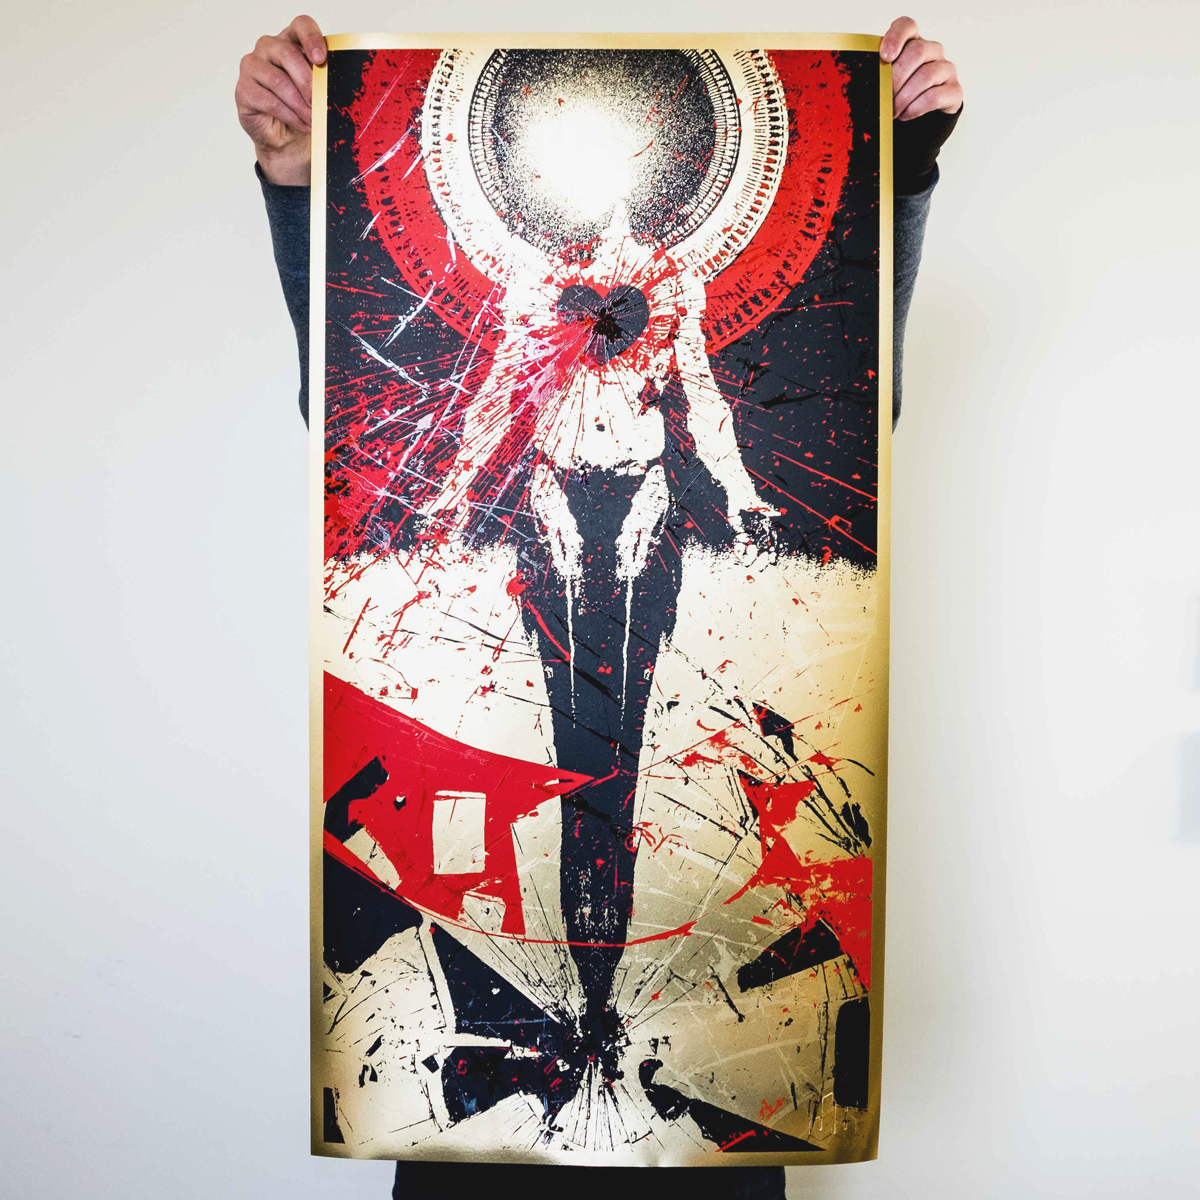 J. Bannon “In Place Apart: Gold Edition” Silkscreened Print